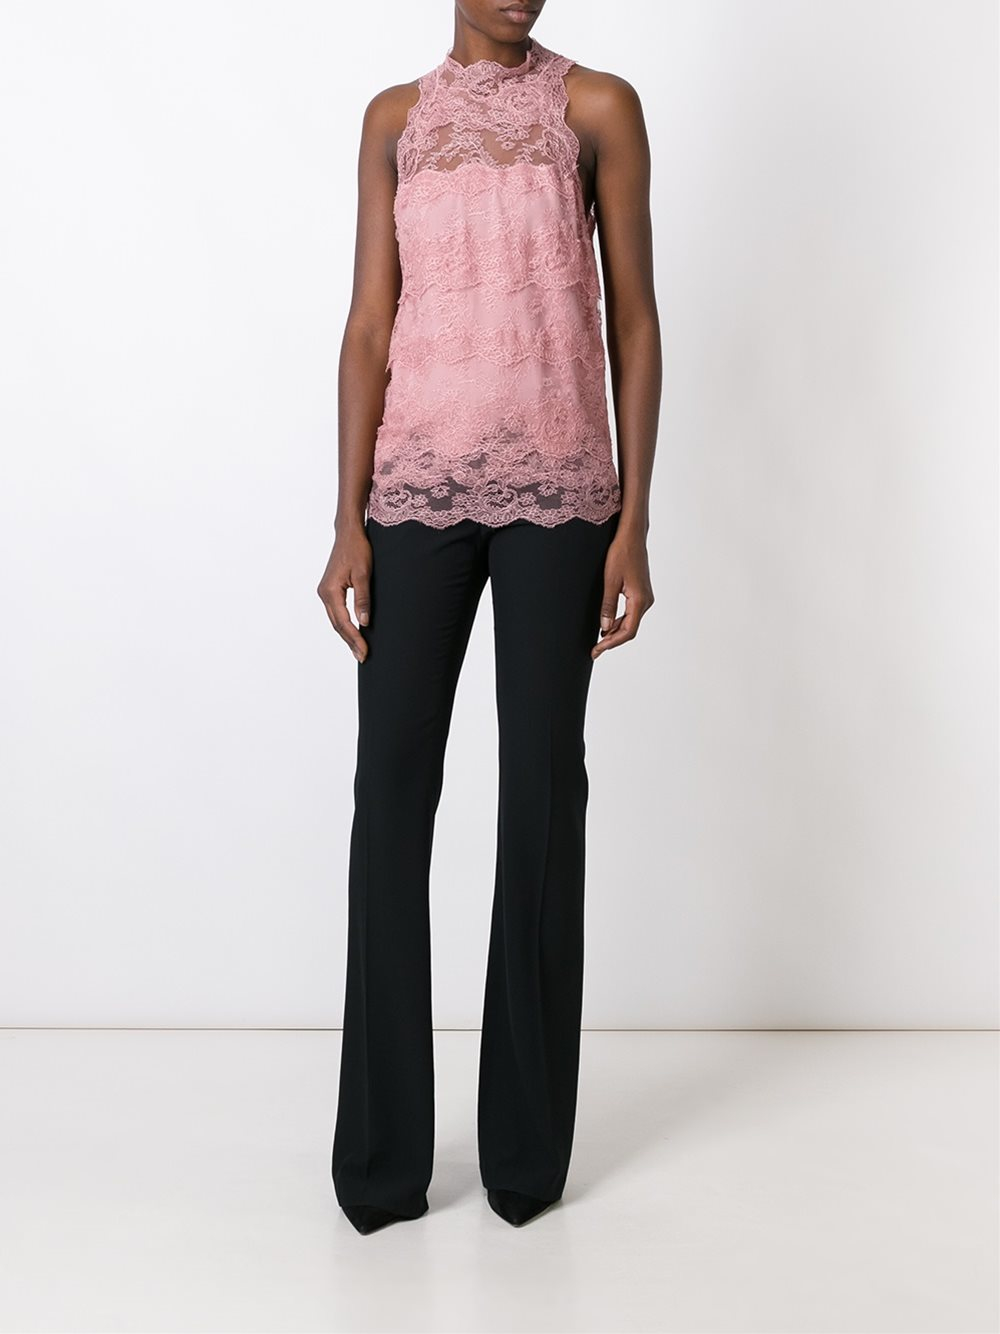 Ermanno scervino Floral Lace Sleeveless Blouse in Brown | Lyst